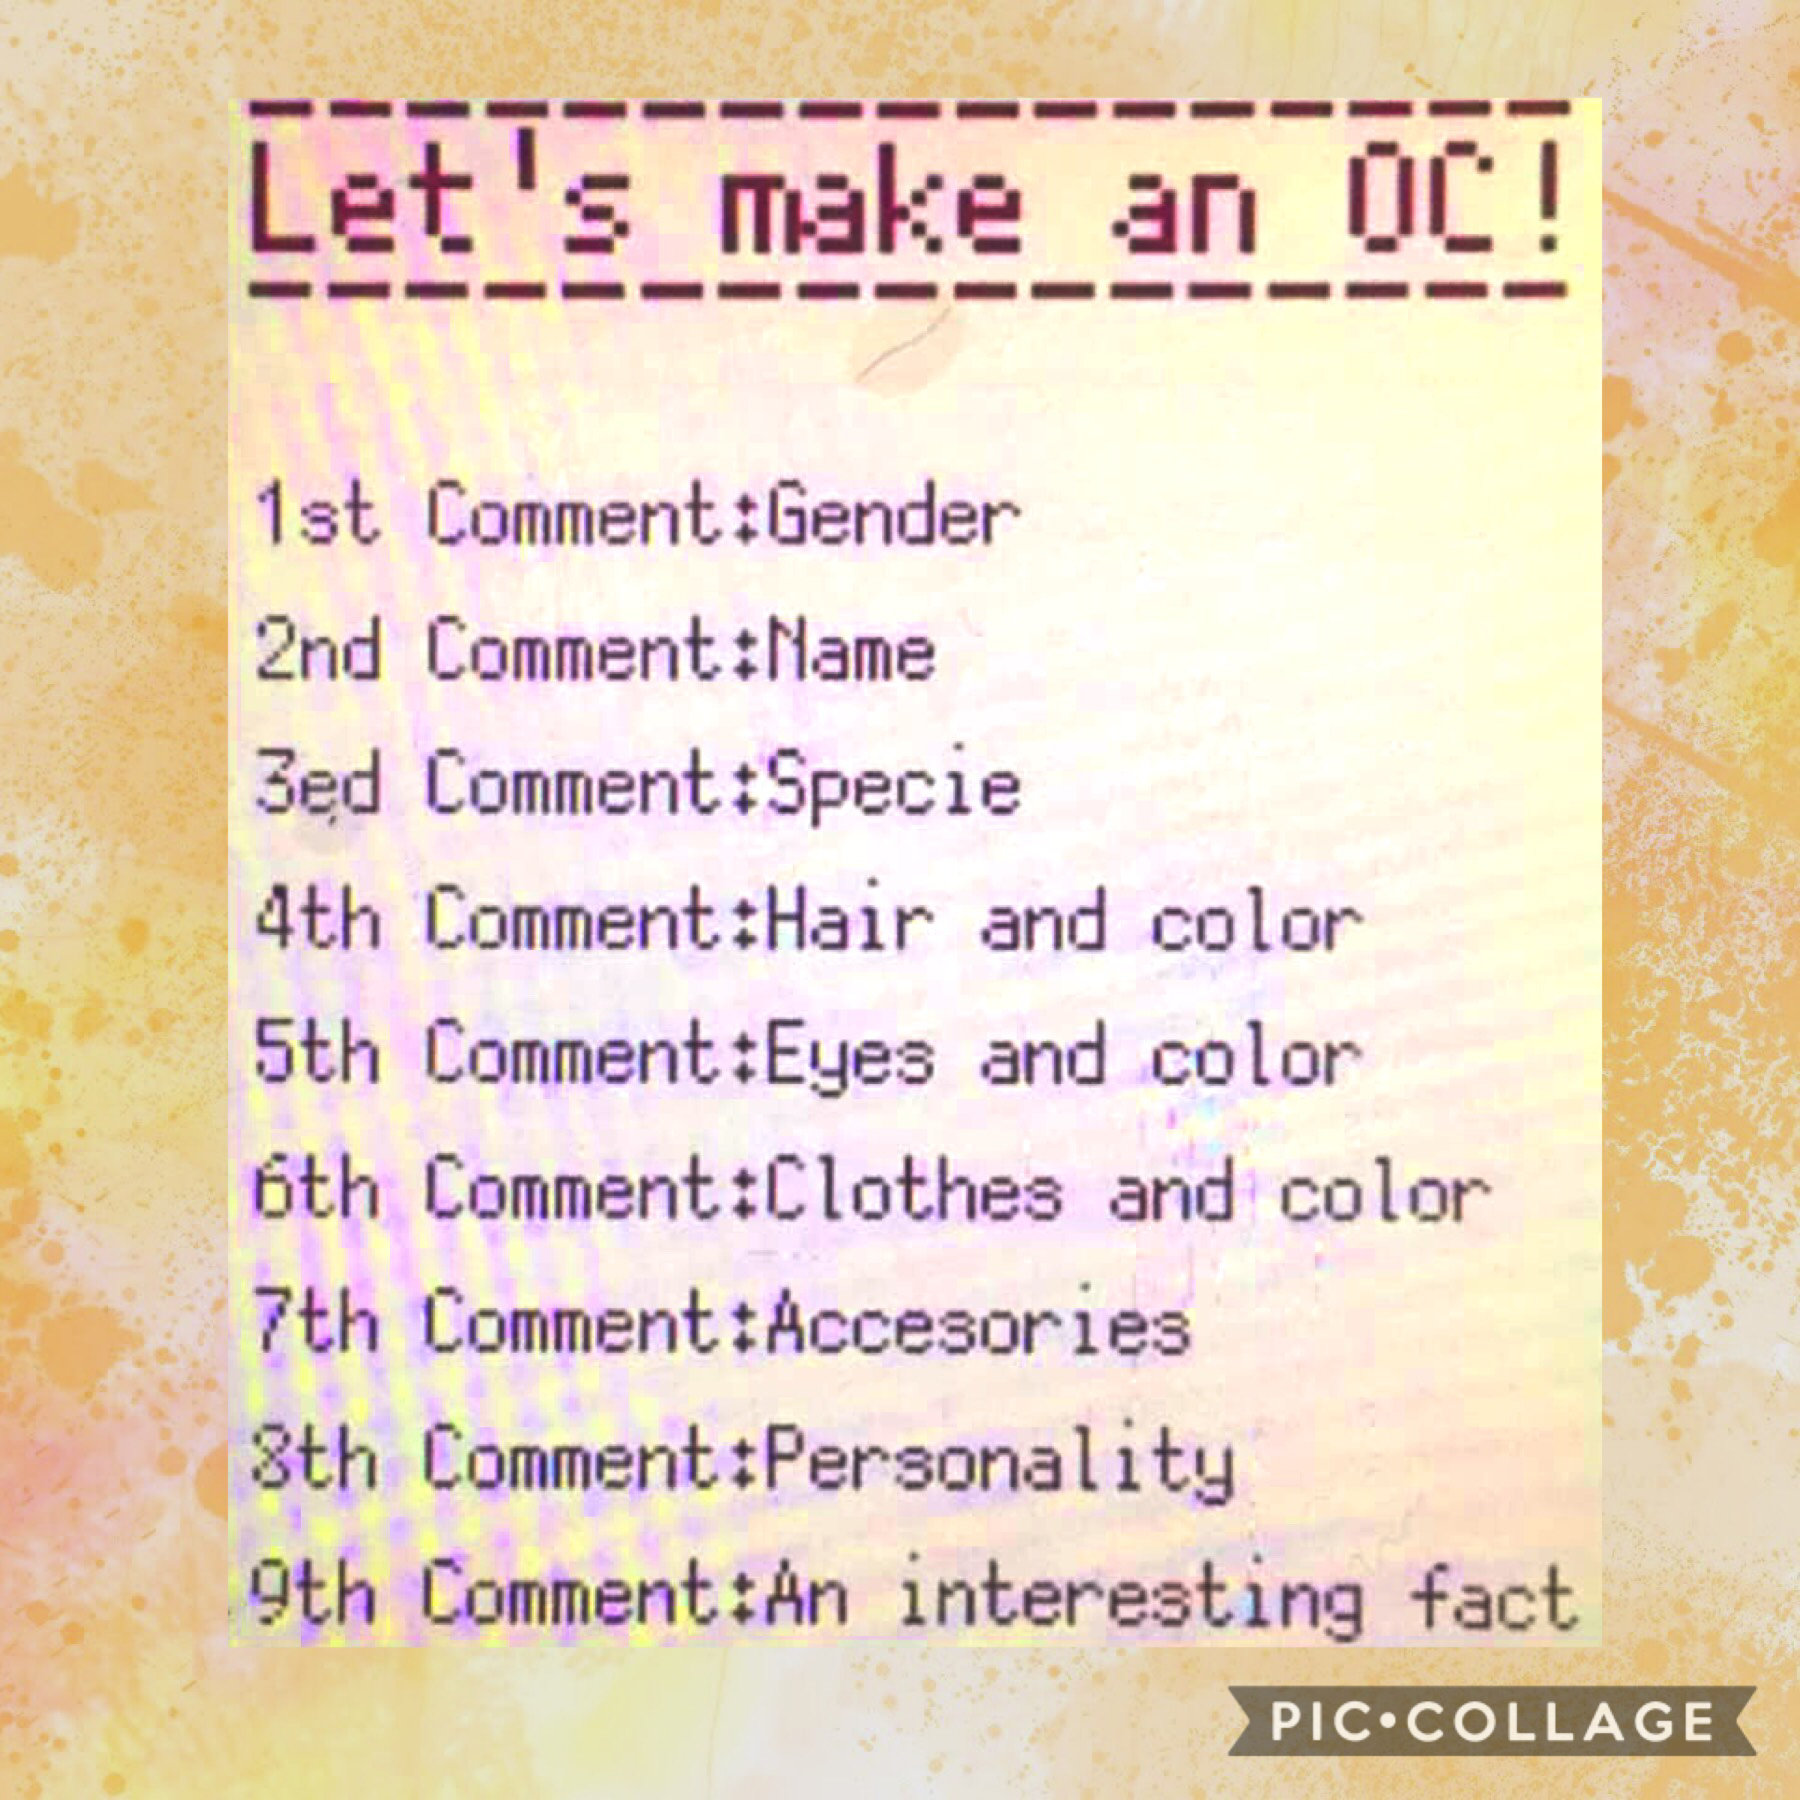 I told myself i wouldnt do this until after Christmas cuz im busy with other art, but I also have art block, soooooo yeah
probably wont be a digital drawing